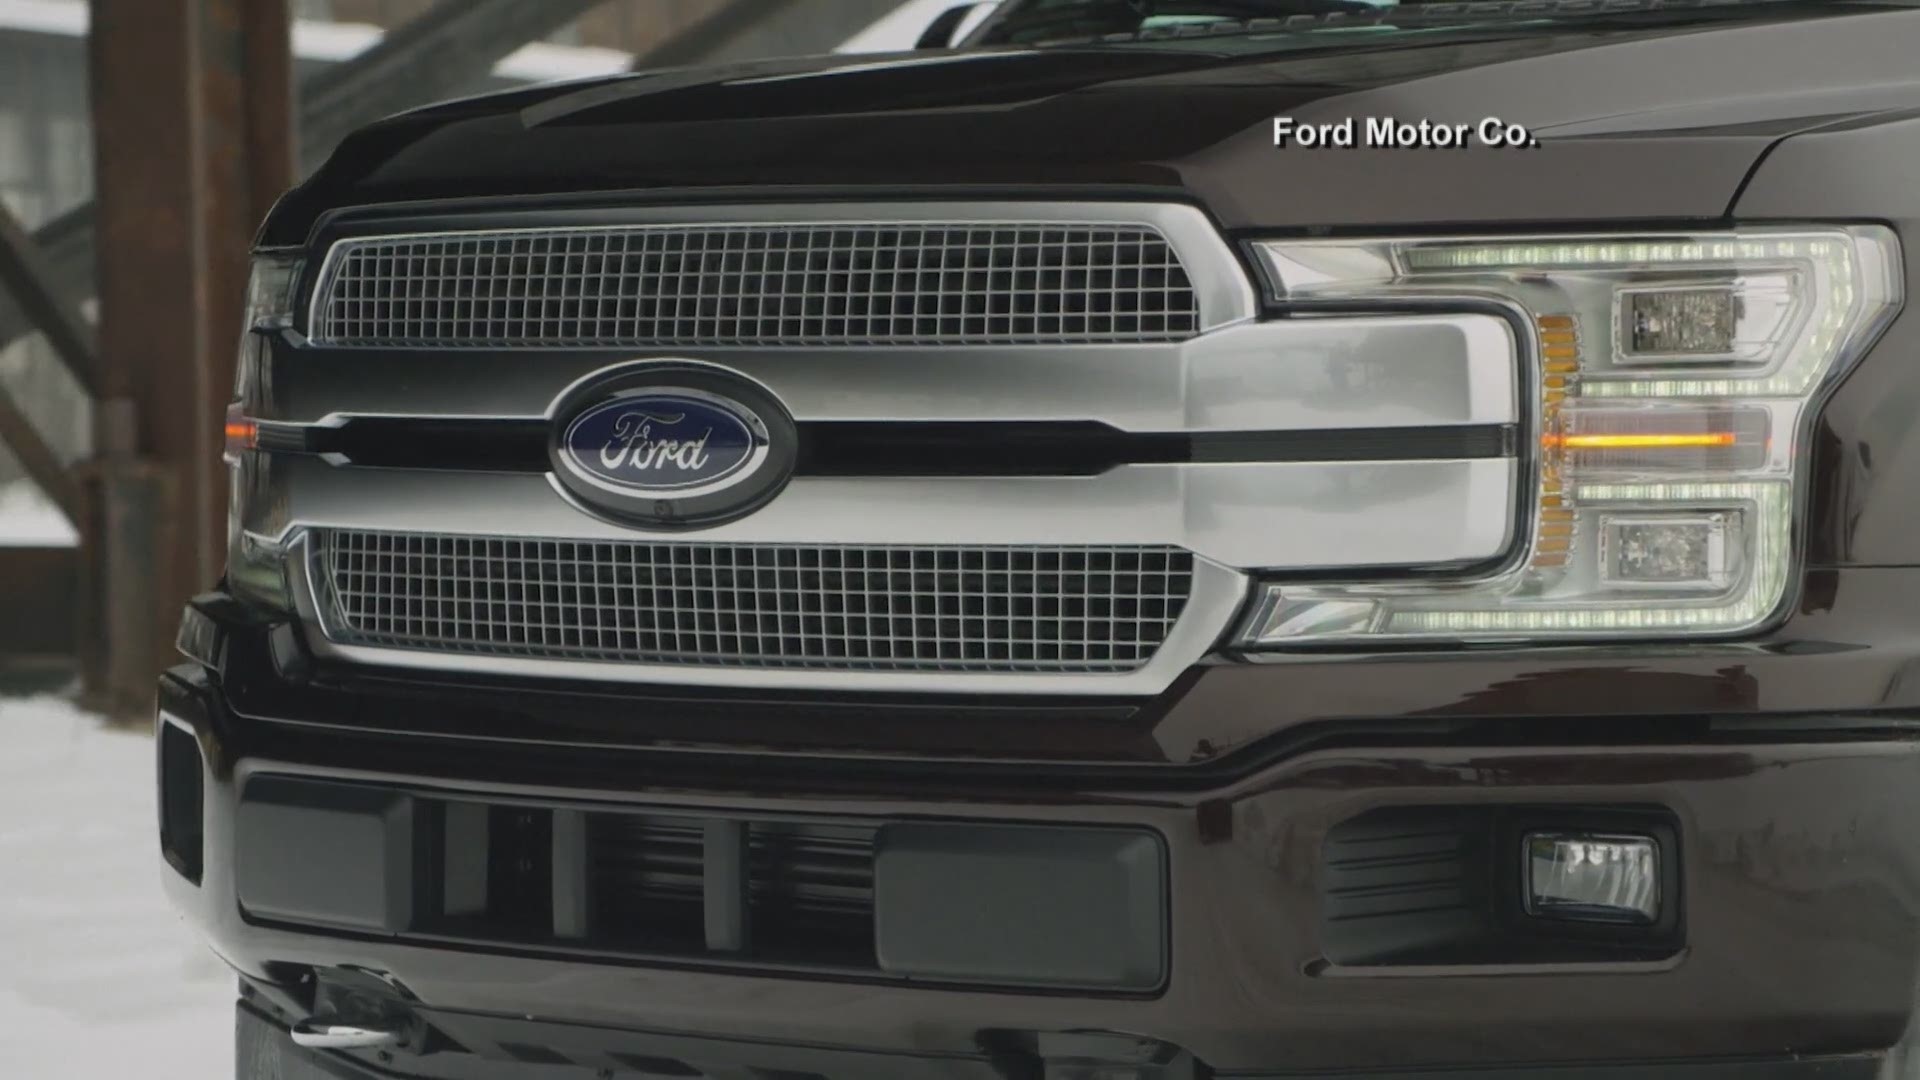 Ford Motor Company is recalling 874,000 pickup trucks in North America due to fire risks. The automaker says the issue involves an engine block heater cable. (NBC News)